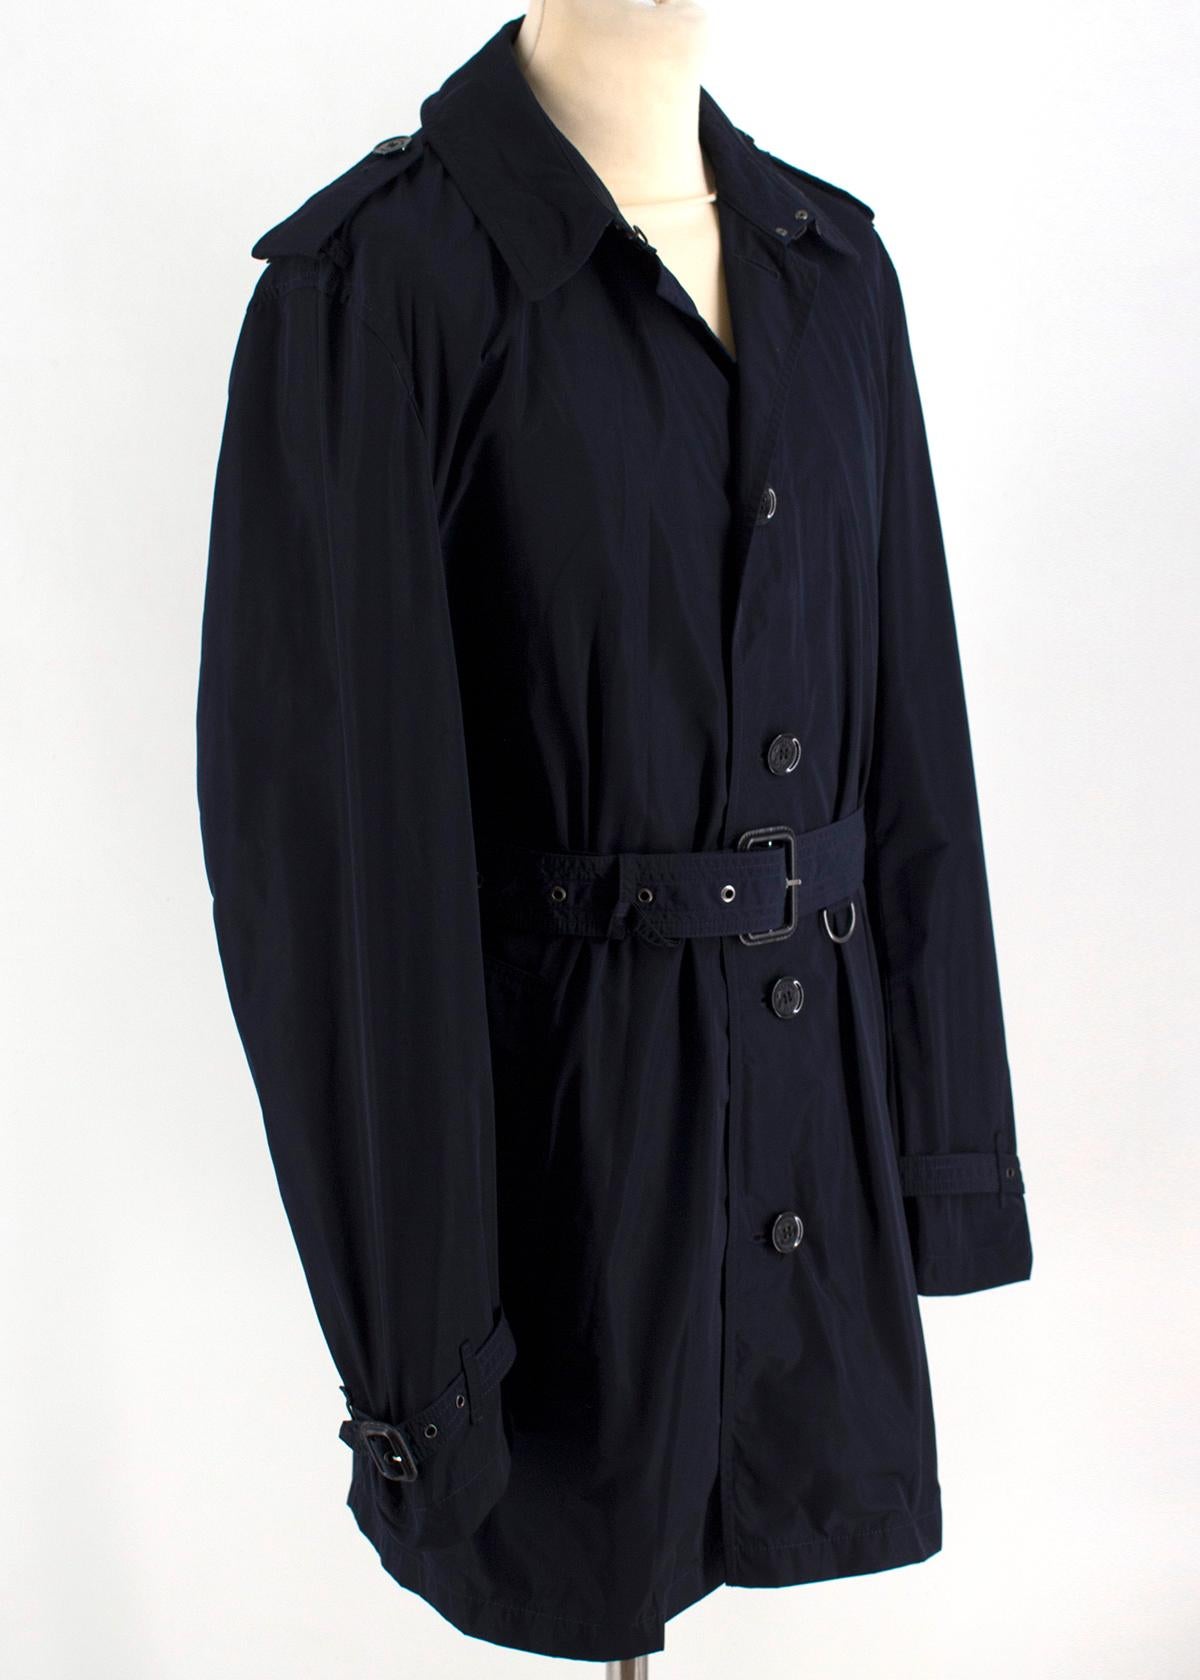 Burberry Navy Belted Trench Coat

-Navy, technical fabric 
-Single breasted button fastening 
-Adjustable waist belt 
-Pointed collar
-Two buttoned pockets at the front
-Blue checked 100% cotton lining

Please note, these items are pre-owned and may